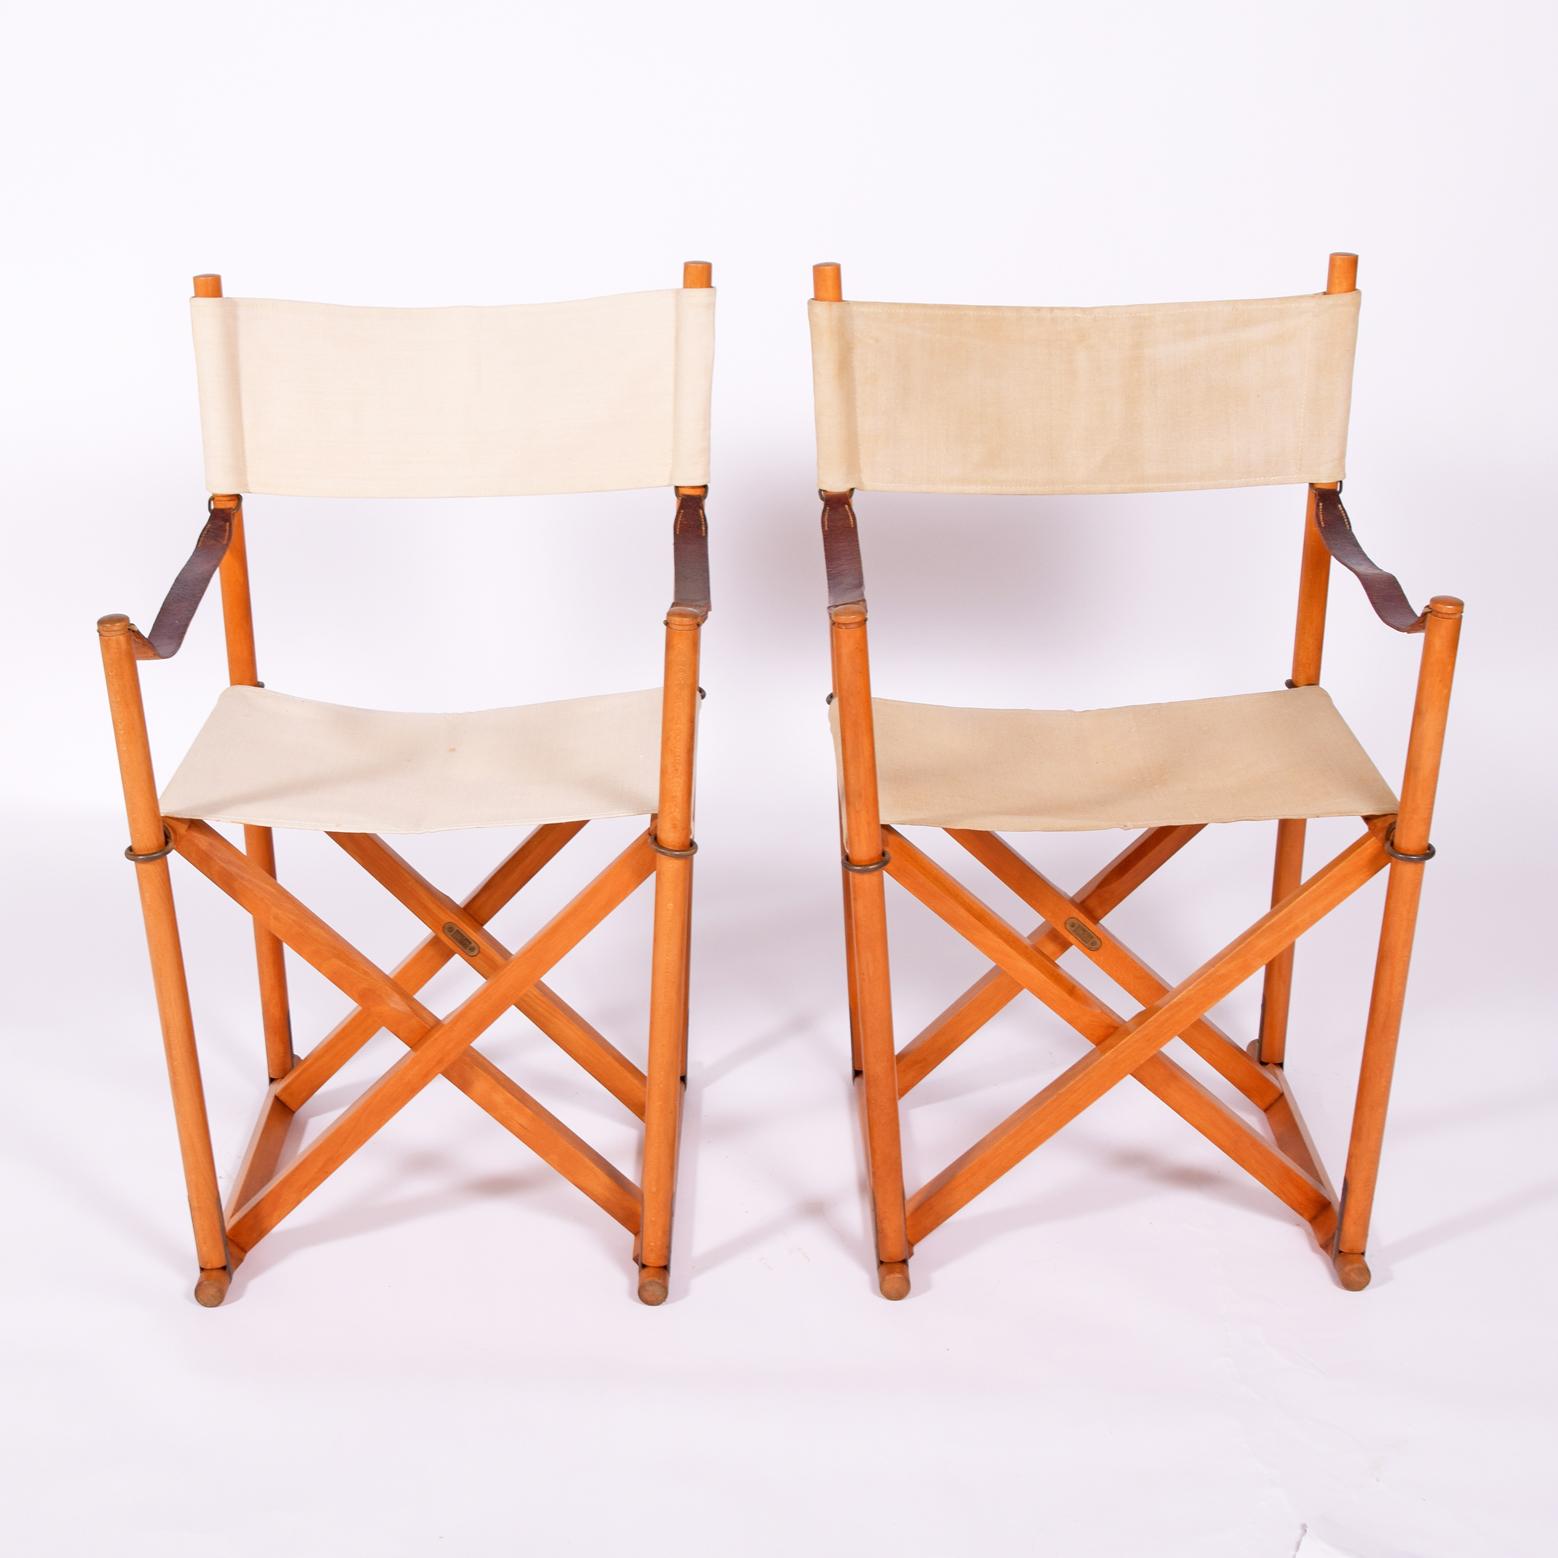 Pair of folding chairs designed by Mogens Koch in 1932 for a church as extra seating ,Beachwood canvas brass this model made by Interna Denmark cabinetmaker in 1960’s.